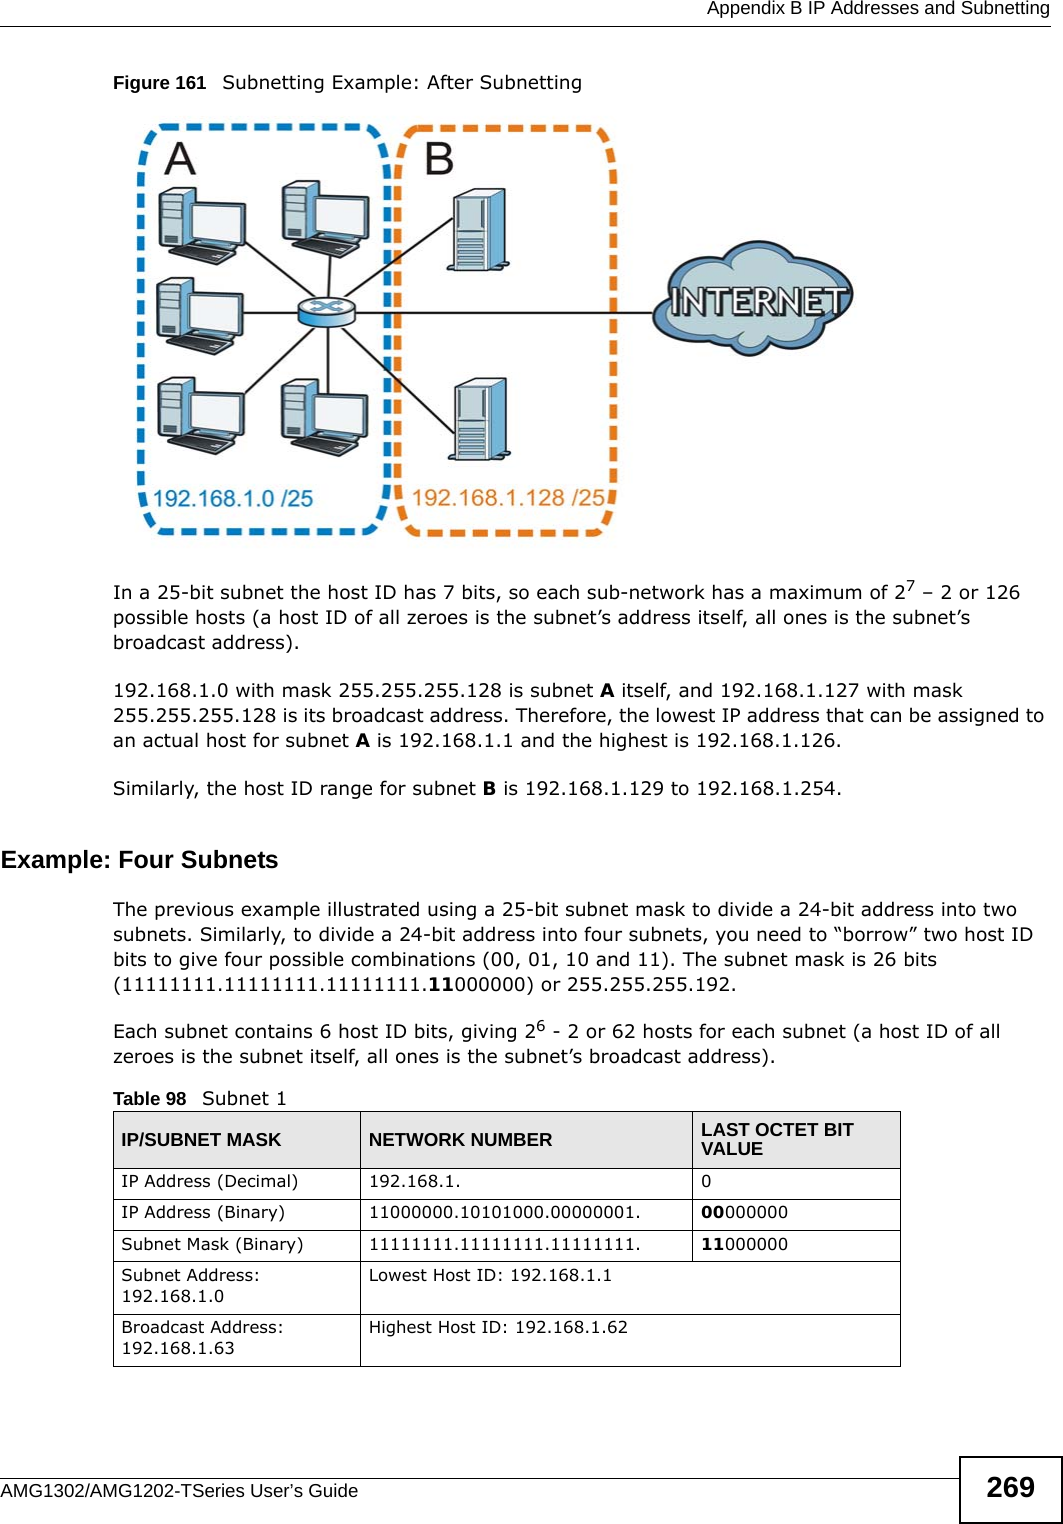  Appendix B IP Addresses and SubnettingAMG1302/AMG1202-TSeries User’s Guide 269Figure 161   Subnetting Example: After SubnettingIn a 25-bit subnet the host ID has 7 bits, so each sub-network has a maximum of 27 – 2 or 126 possible hosts (a host ID of all zeroes is the subnet’s address itself, all ones is the subnet’s broadcast address).192.168.1.0 with mask 255.255.255.128 is subnet A itself, and 192.168.1.127 with mask 255.255.255.128 is its broadcast address. Therefore, the lowest IP address that can be assigned to an actual host for subnet A is 192.168.1.1 and the highest is 192.168.1.126. Similarly, the host ID range for subnet B is 192.168.1.129 to 192.168.1.254.Example: Four Subnets The previous example illustrated using a 25-bit subnet mask to divide a 24-bit address into two subnets. Similarly, to divide a 24-bit address into four subnets, you need to “borrow” two host ID bits to give four possible combinations (00, 01, 10 and 11). The subnet mask is 26 bits (11111111.11111111.11111111.11000000) or 255.255.255.192. Each subnet contains 6 host ID bits, giving 26 - 2 or 62 hosts for each subnet (a host ID of all zeroes is the subnet itself, all ones is the subnet’s broadcast address). Table 98   Subnet 1IP/SUBNET MASK NETWORK NUMBER LAST OCTET BIT VALUEIP Address (Decimal) 192.168.1. 0IP Address (Binary) 11000000.10101000.00000001. 00000000Subnet Mask (Binary) 11111111.11111111.11111111. 11000000Subnet Address: 192.168.1.0Lowest Host ID: 192.168.1.1Broadcast Address: 192.168.1.63Highest Host ID: 192.168.1.62